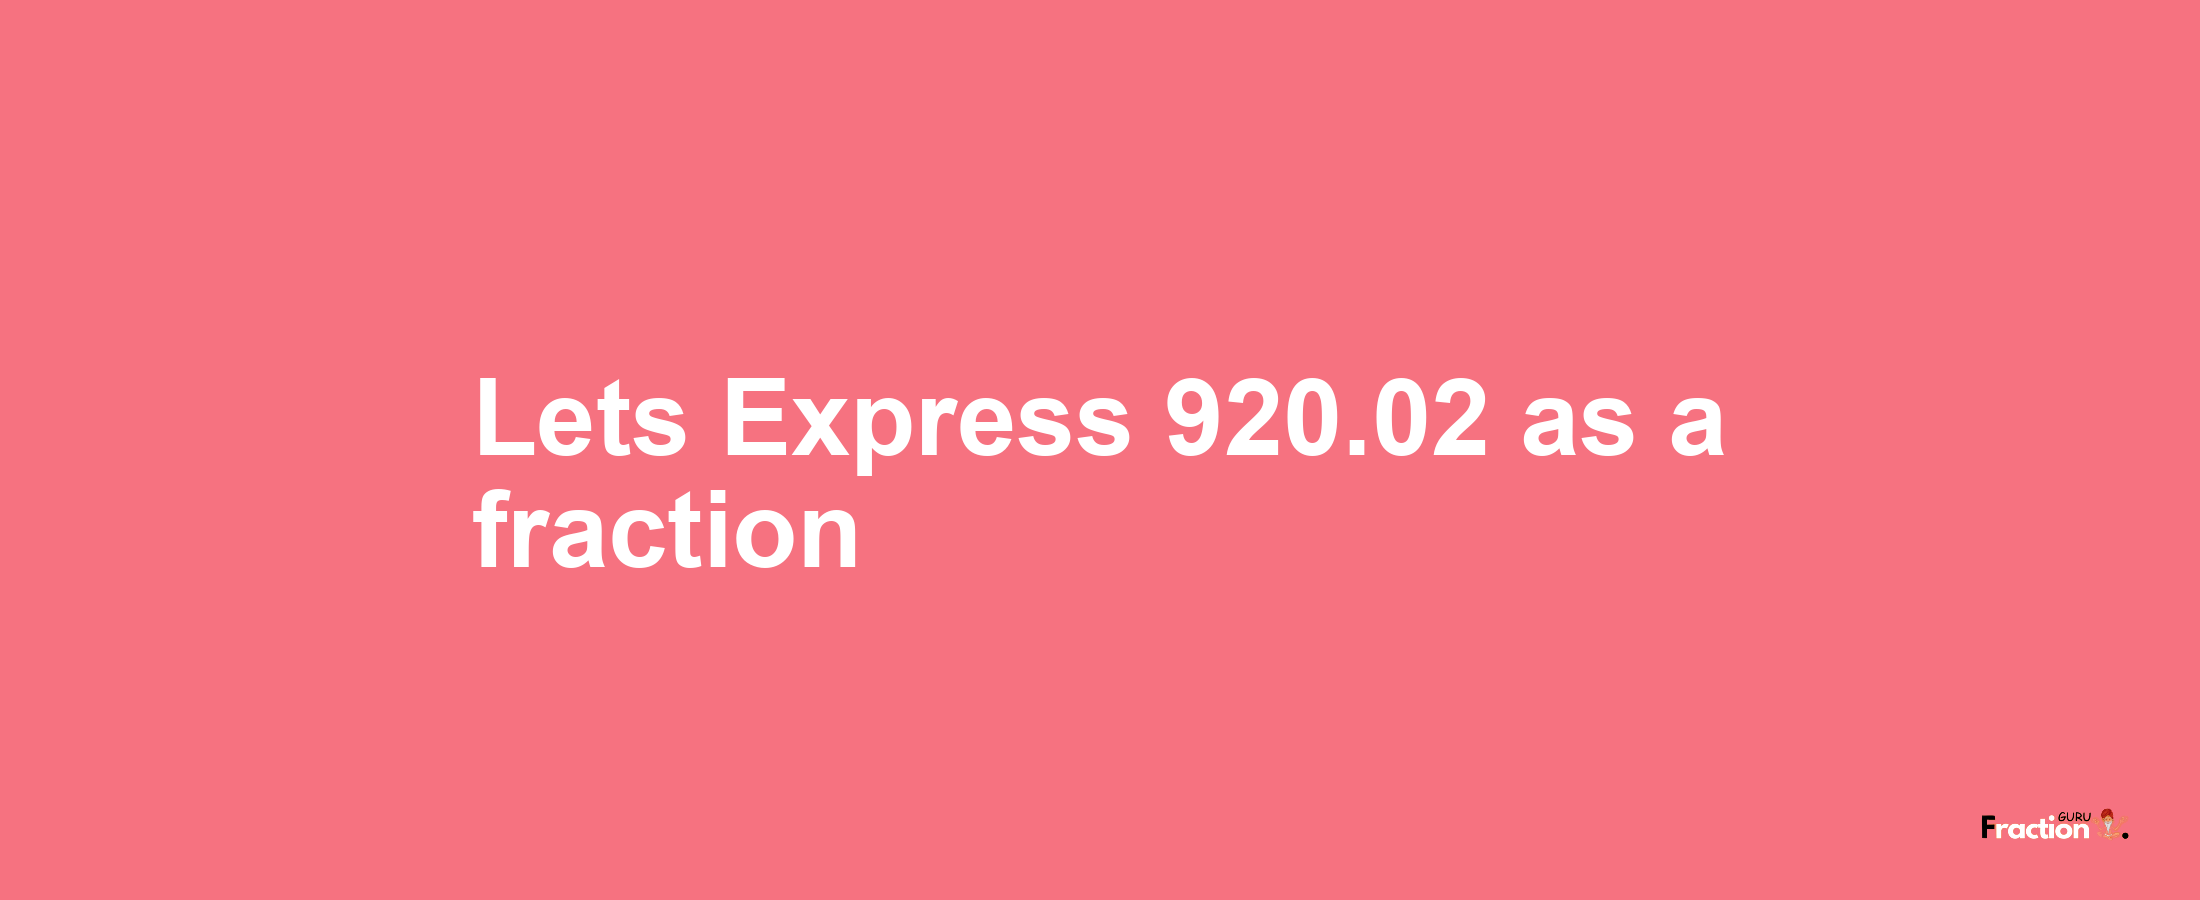 Lets Express 920.02 as afraction